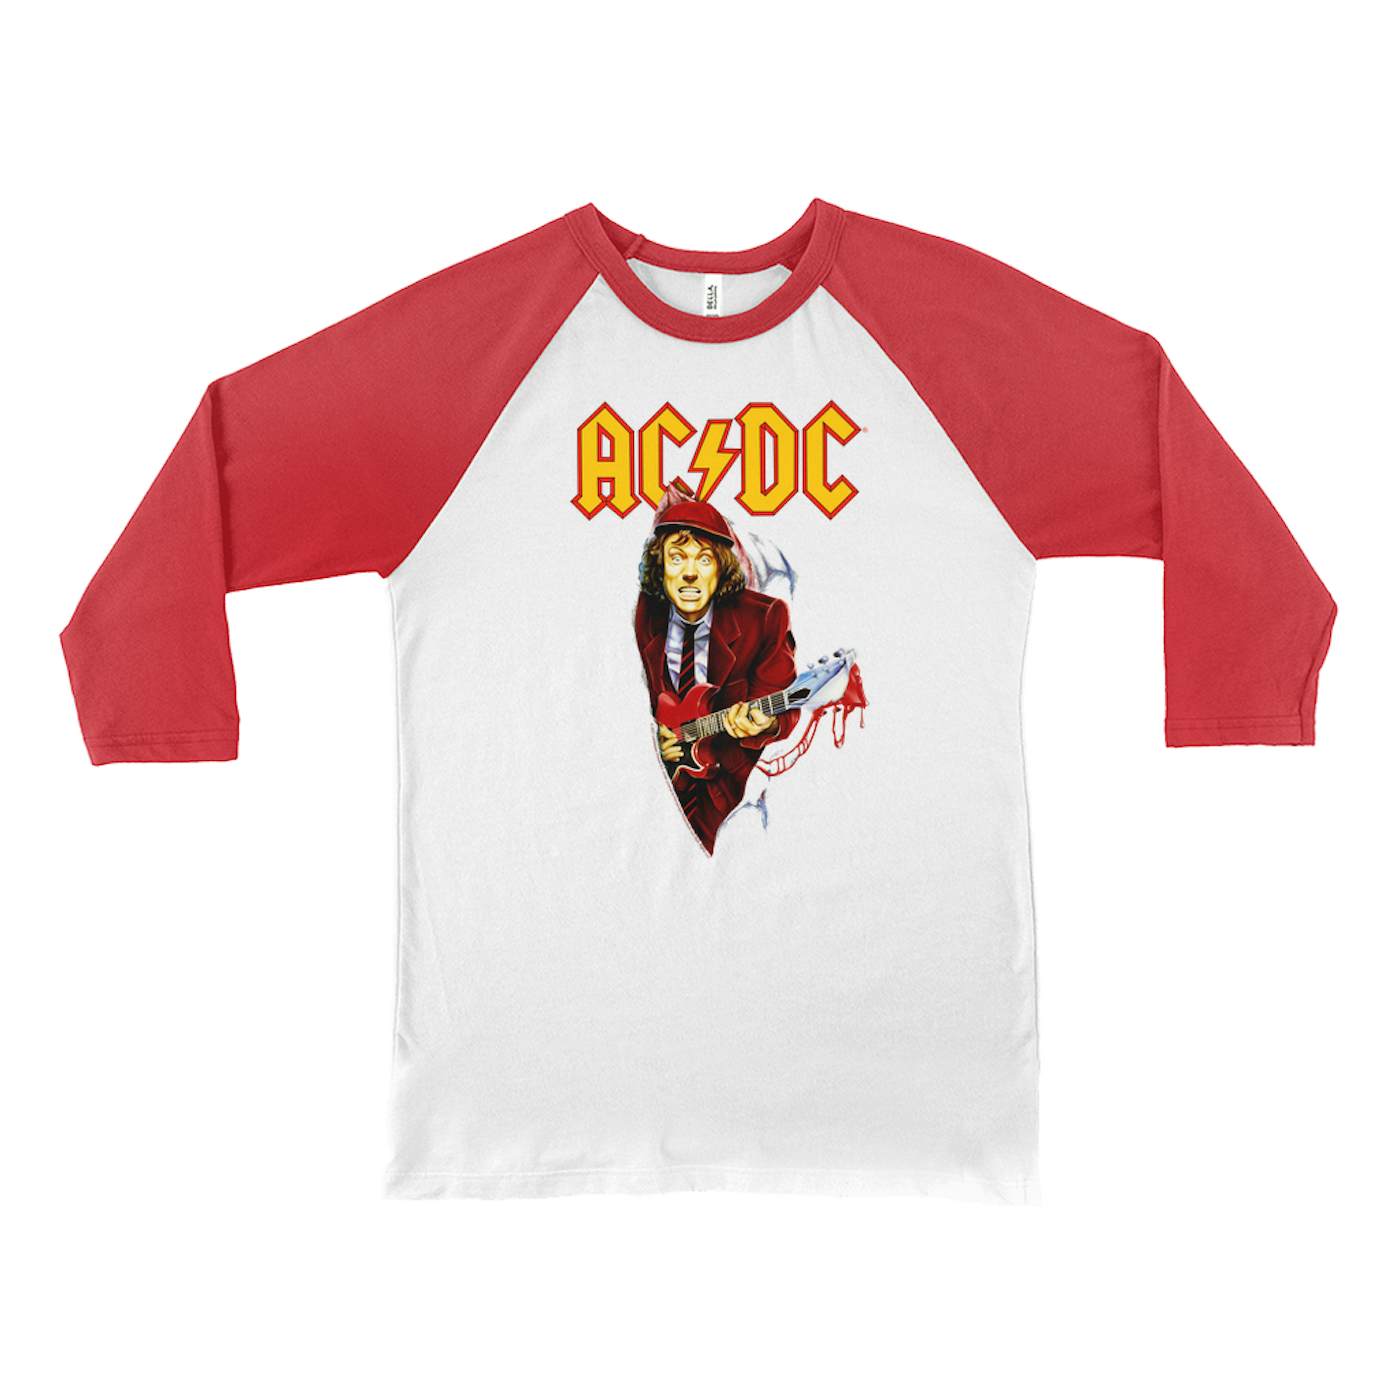 AC/DC 3/4 Sleeve Baseball Tee | Angus Young With Bloody Guitar Design ACDC Shirt